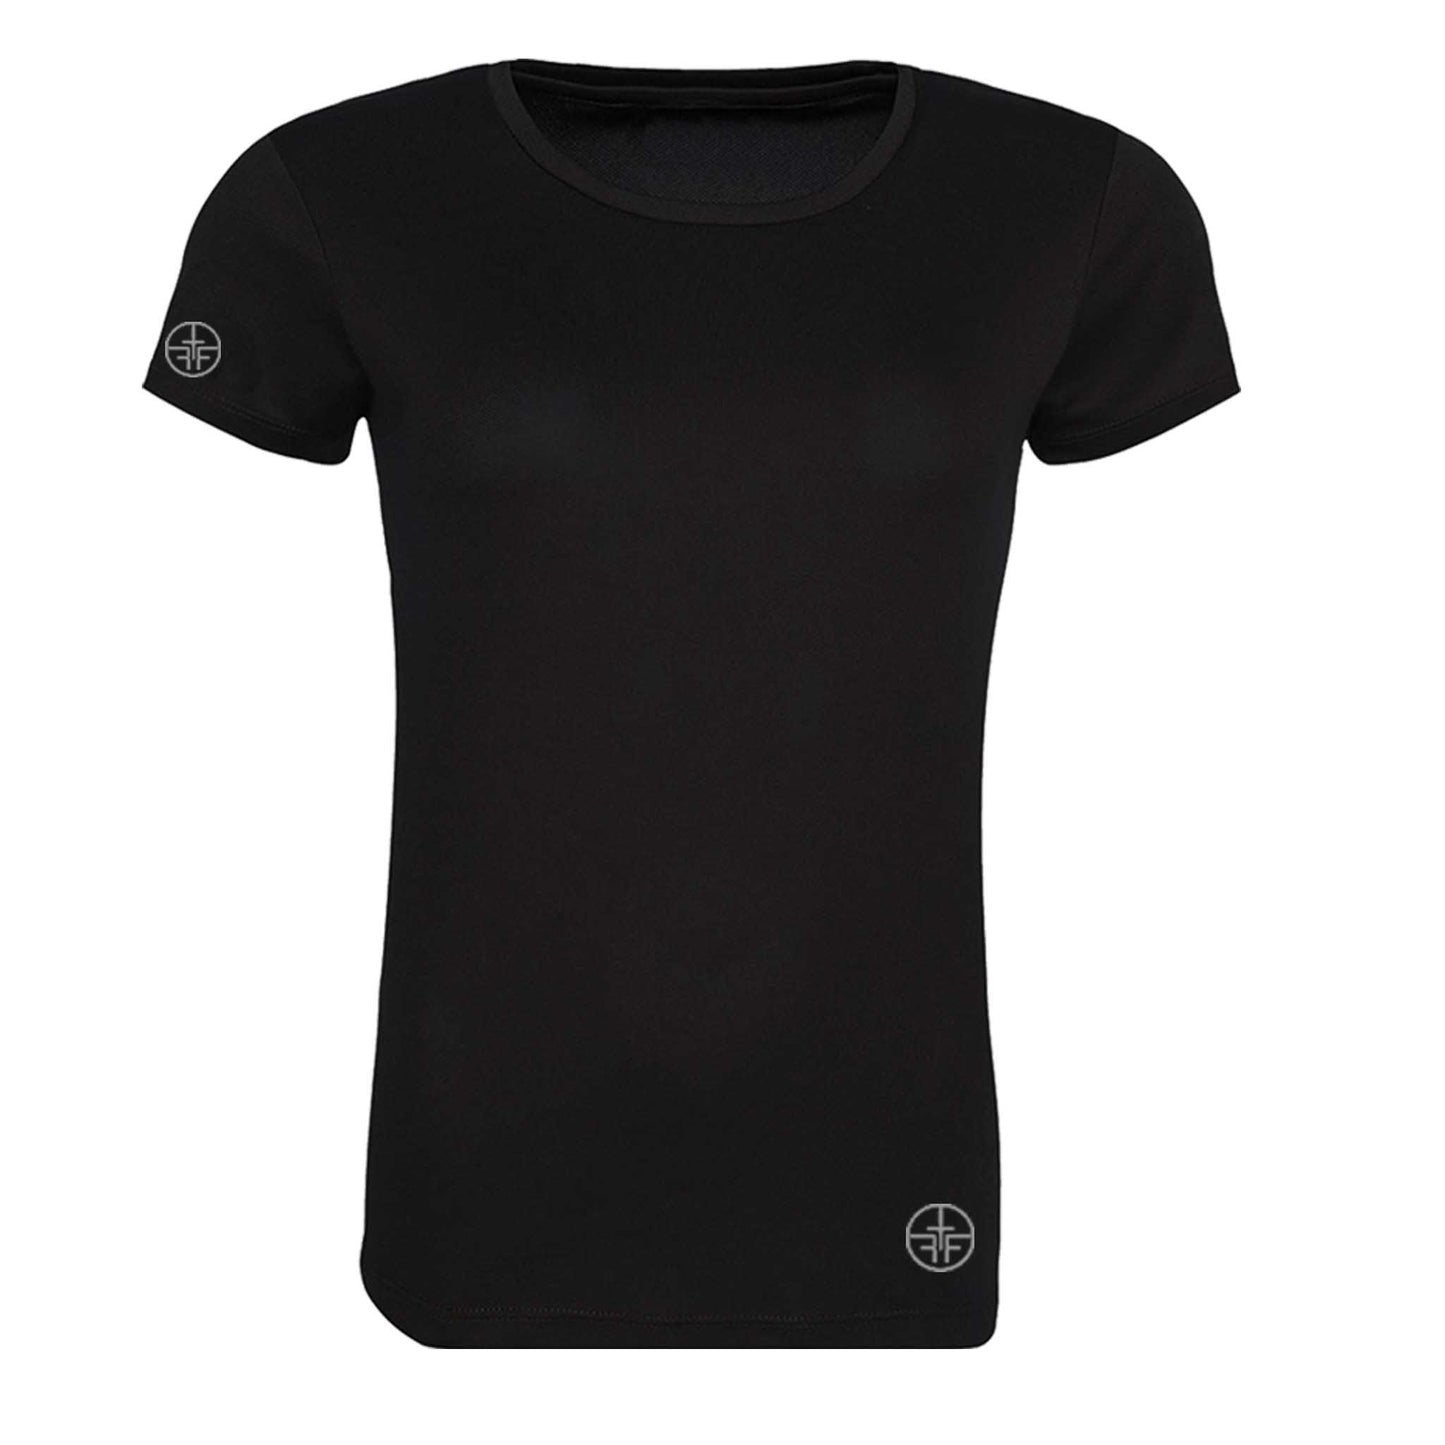 DEMI - "Cool" Technology Textured Training Top - Black